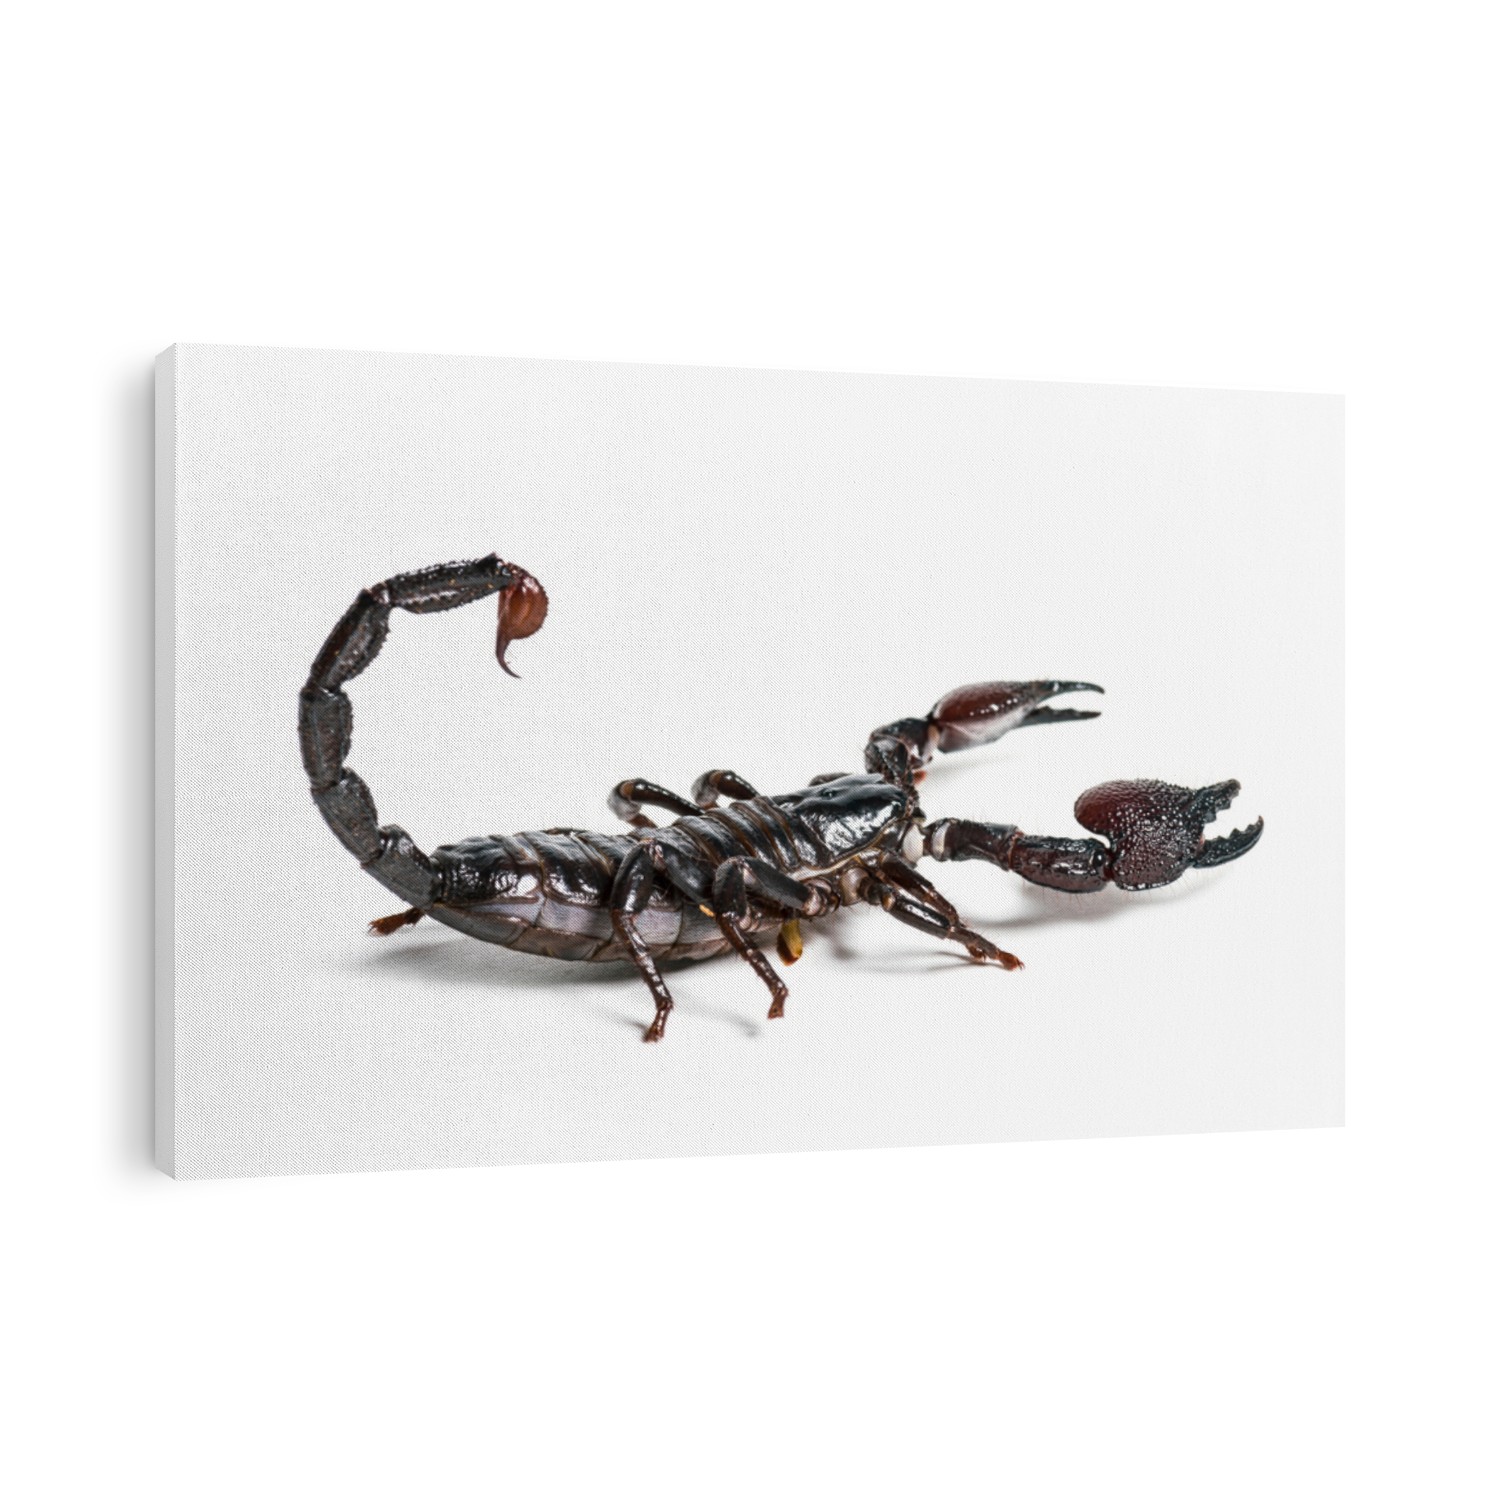 Emperor scorpion, Pandinus imperator, in front of white background